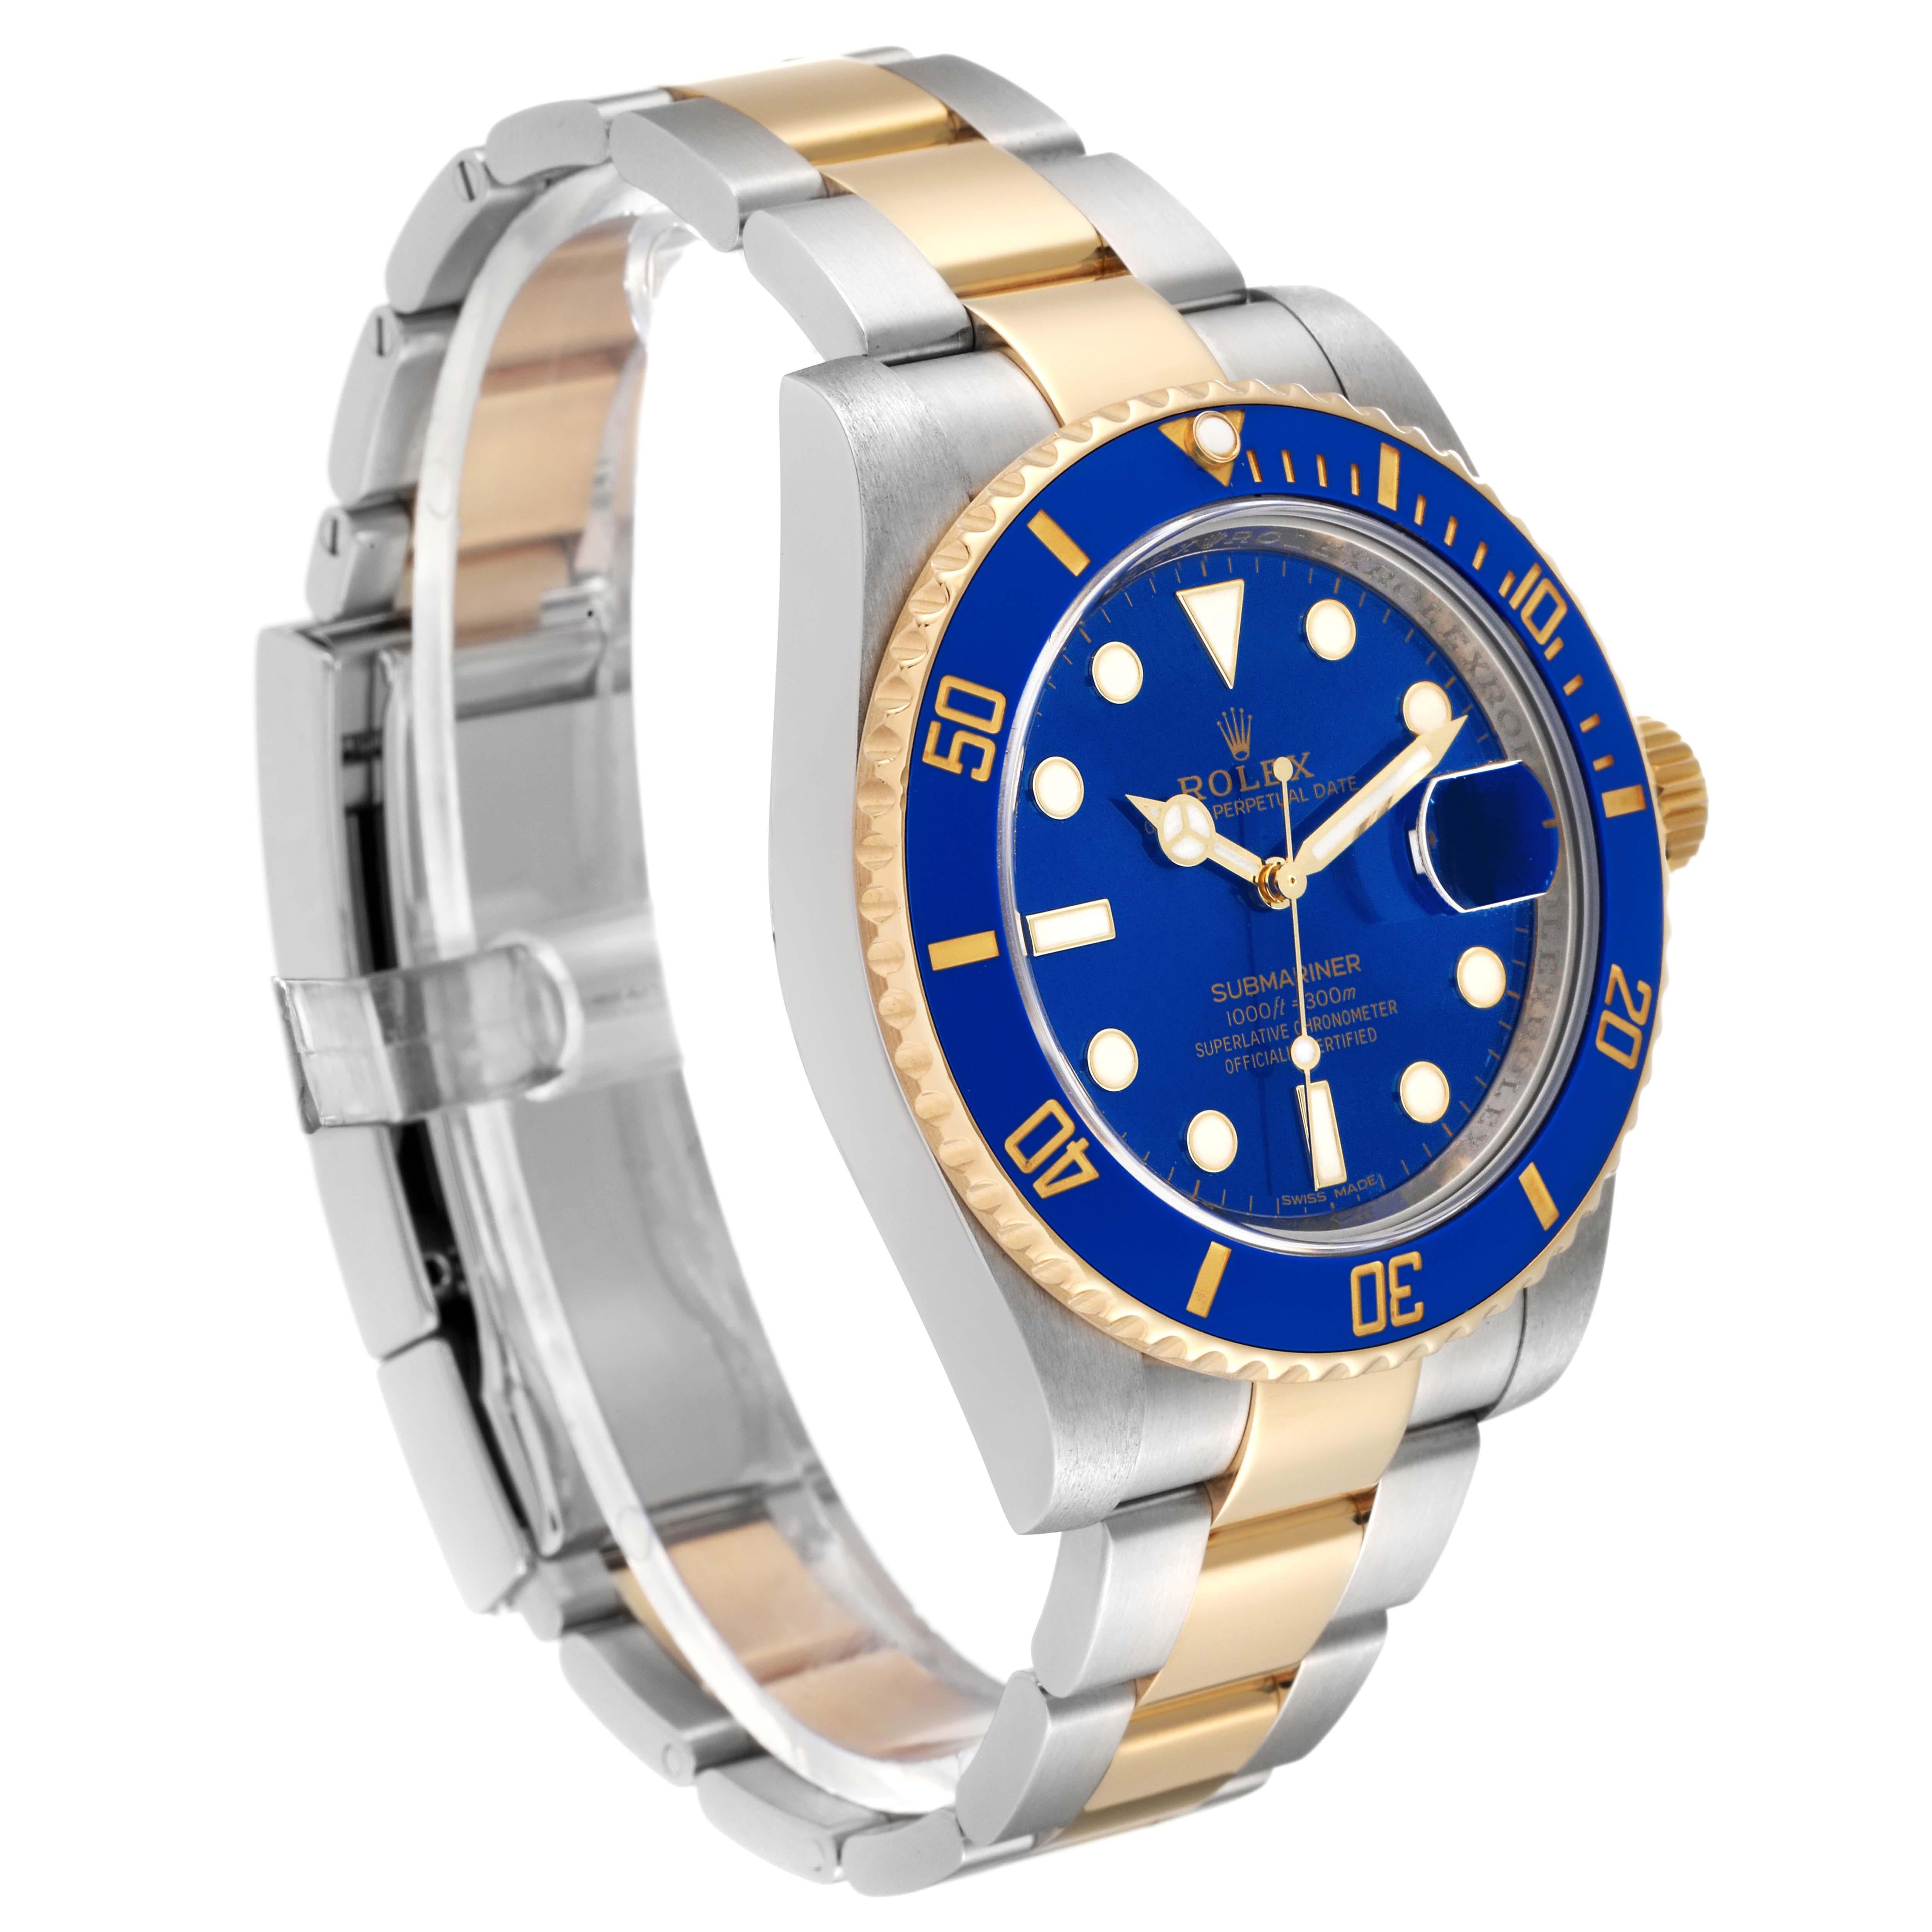 Rolex Submariner Steel Yellow Gold Blue Dial Mens Watch 116613 In Excellent Condition For Sale In Atlanta, GA